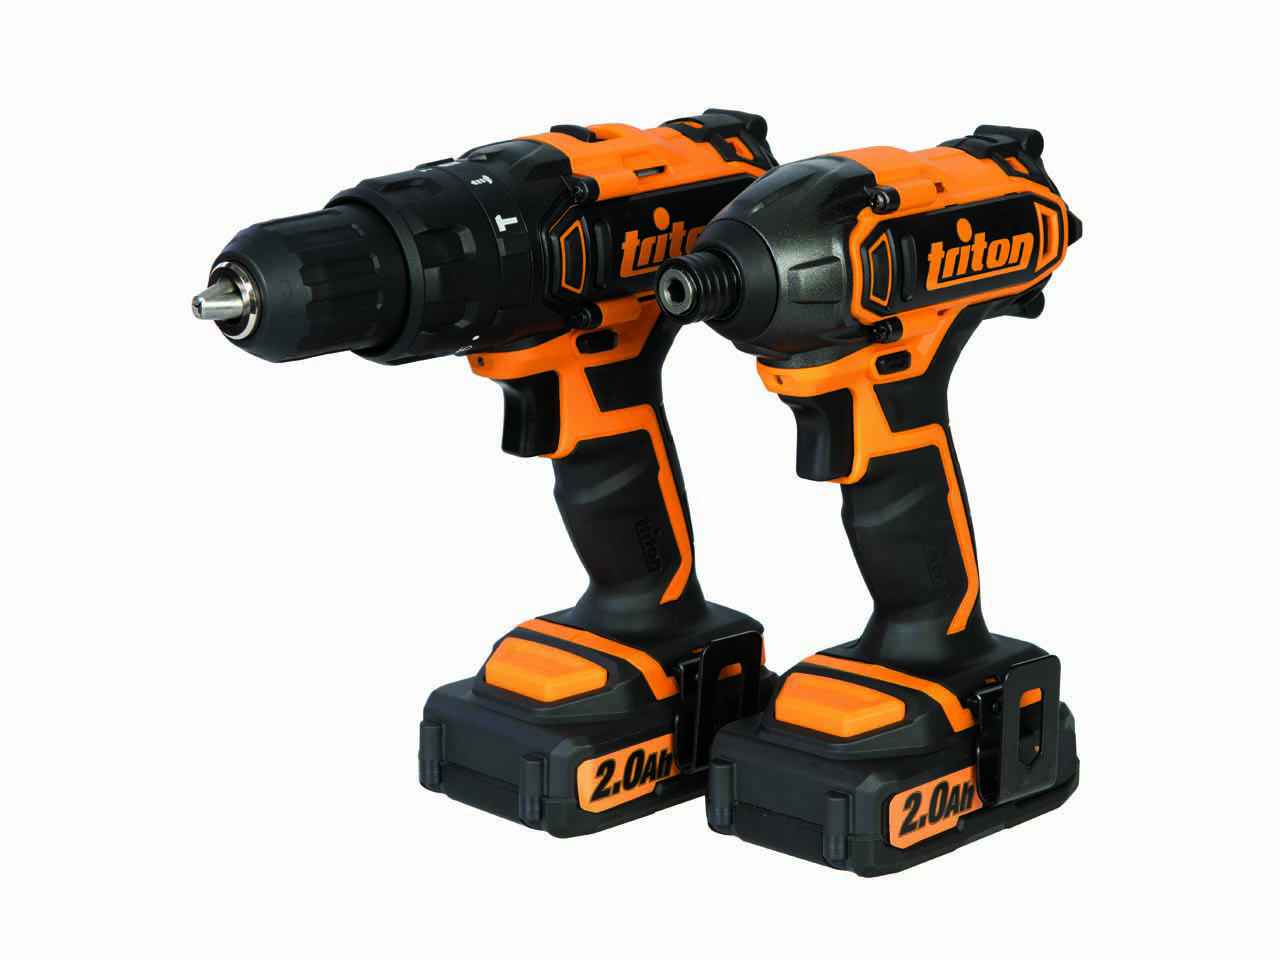 Triton 275478 T20 Combi Drill and Impact Driver Twin Pack 20V